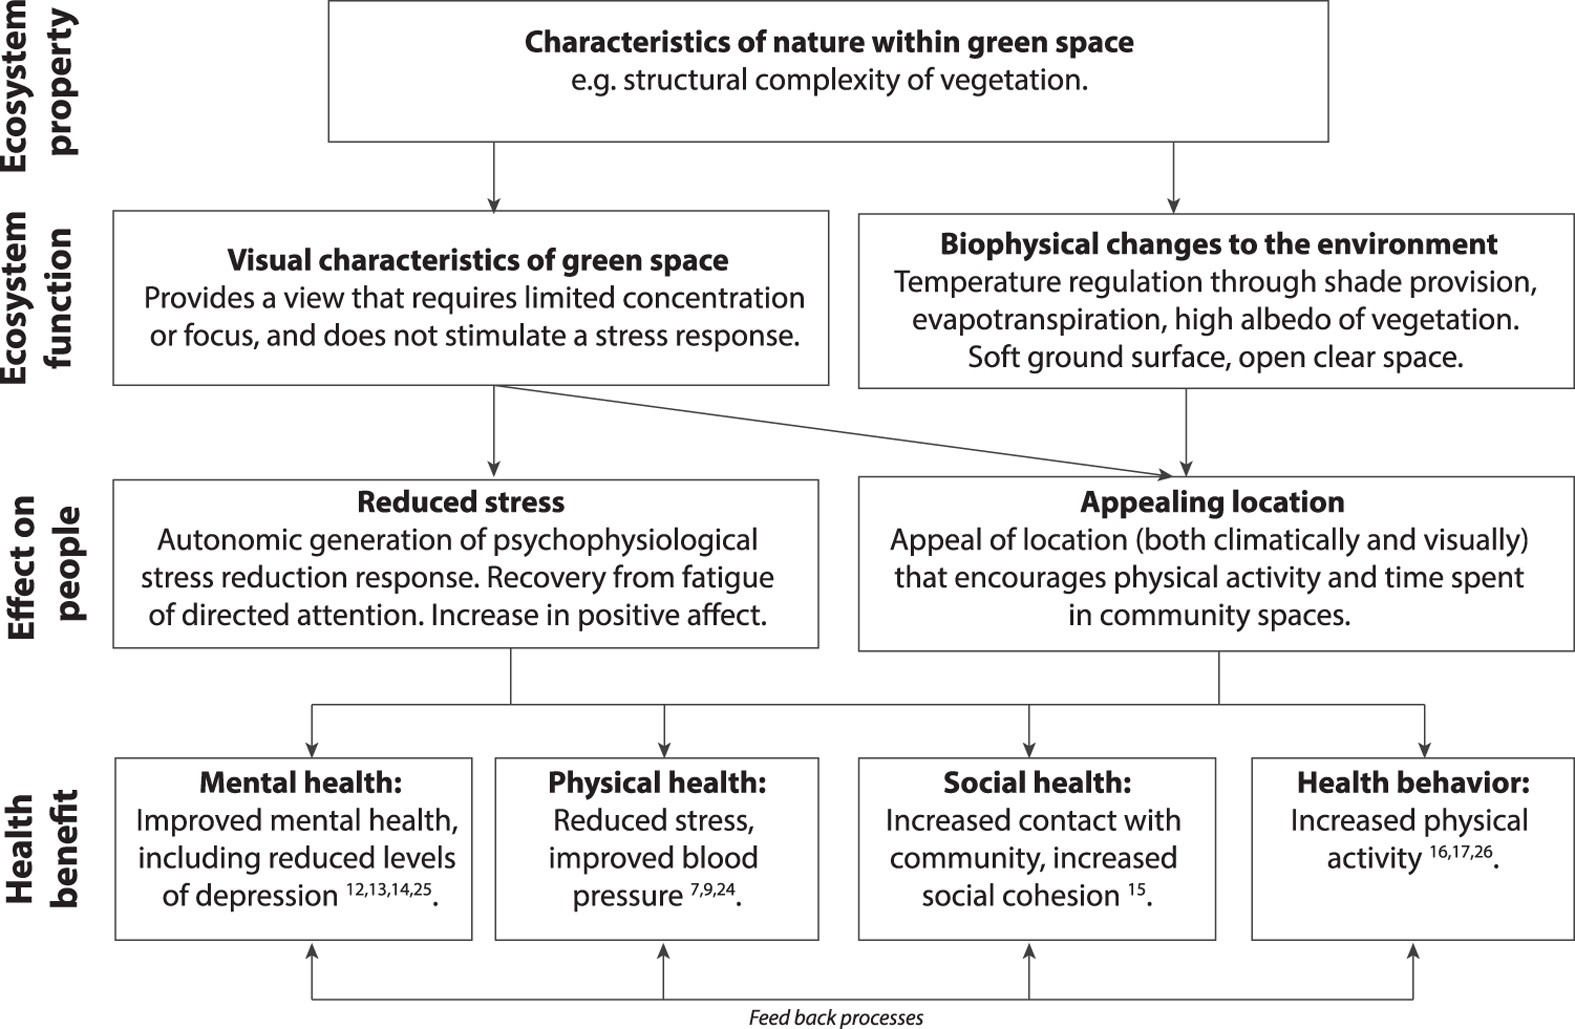 Health Benefits from Nature Experiences Depend on Dose